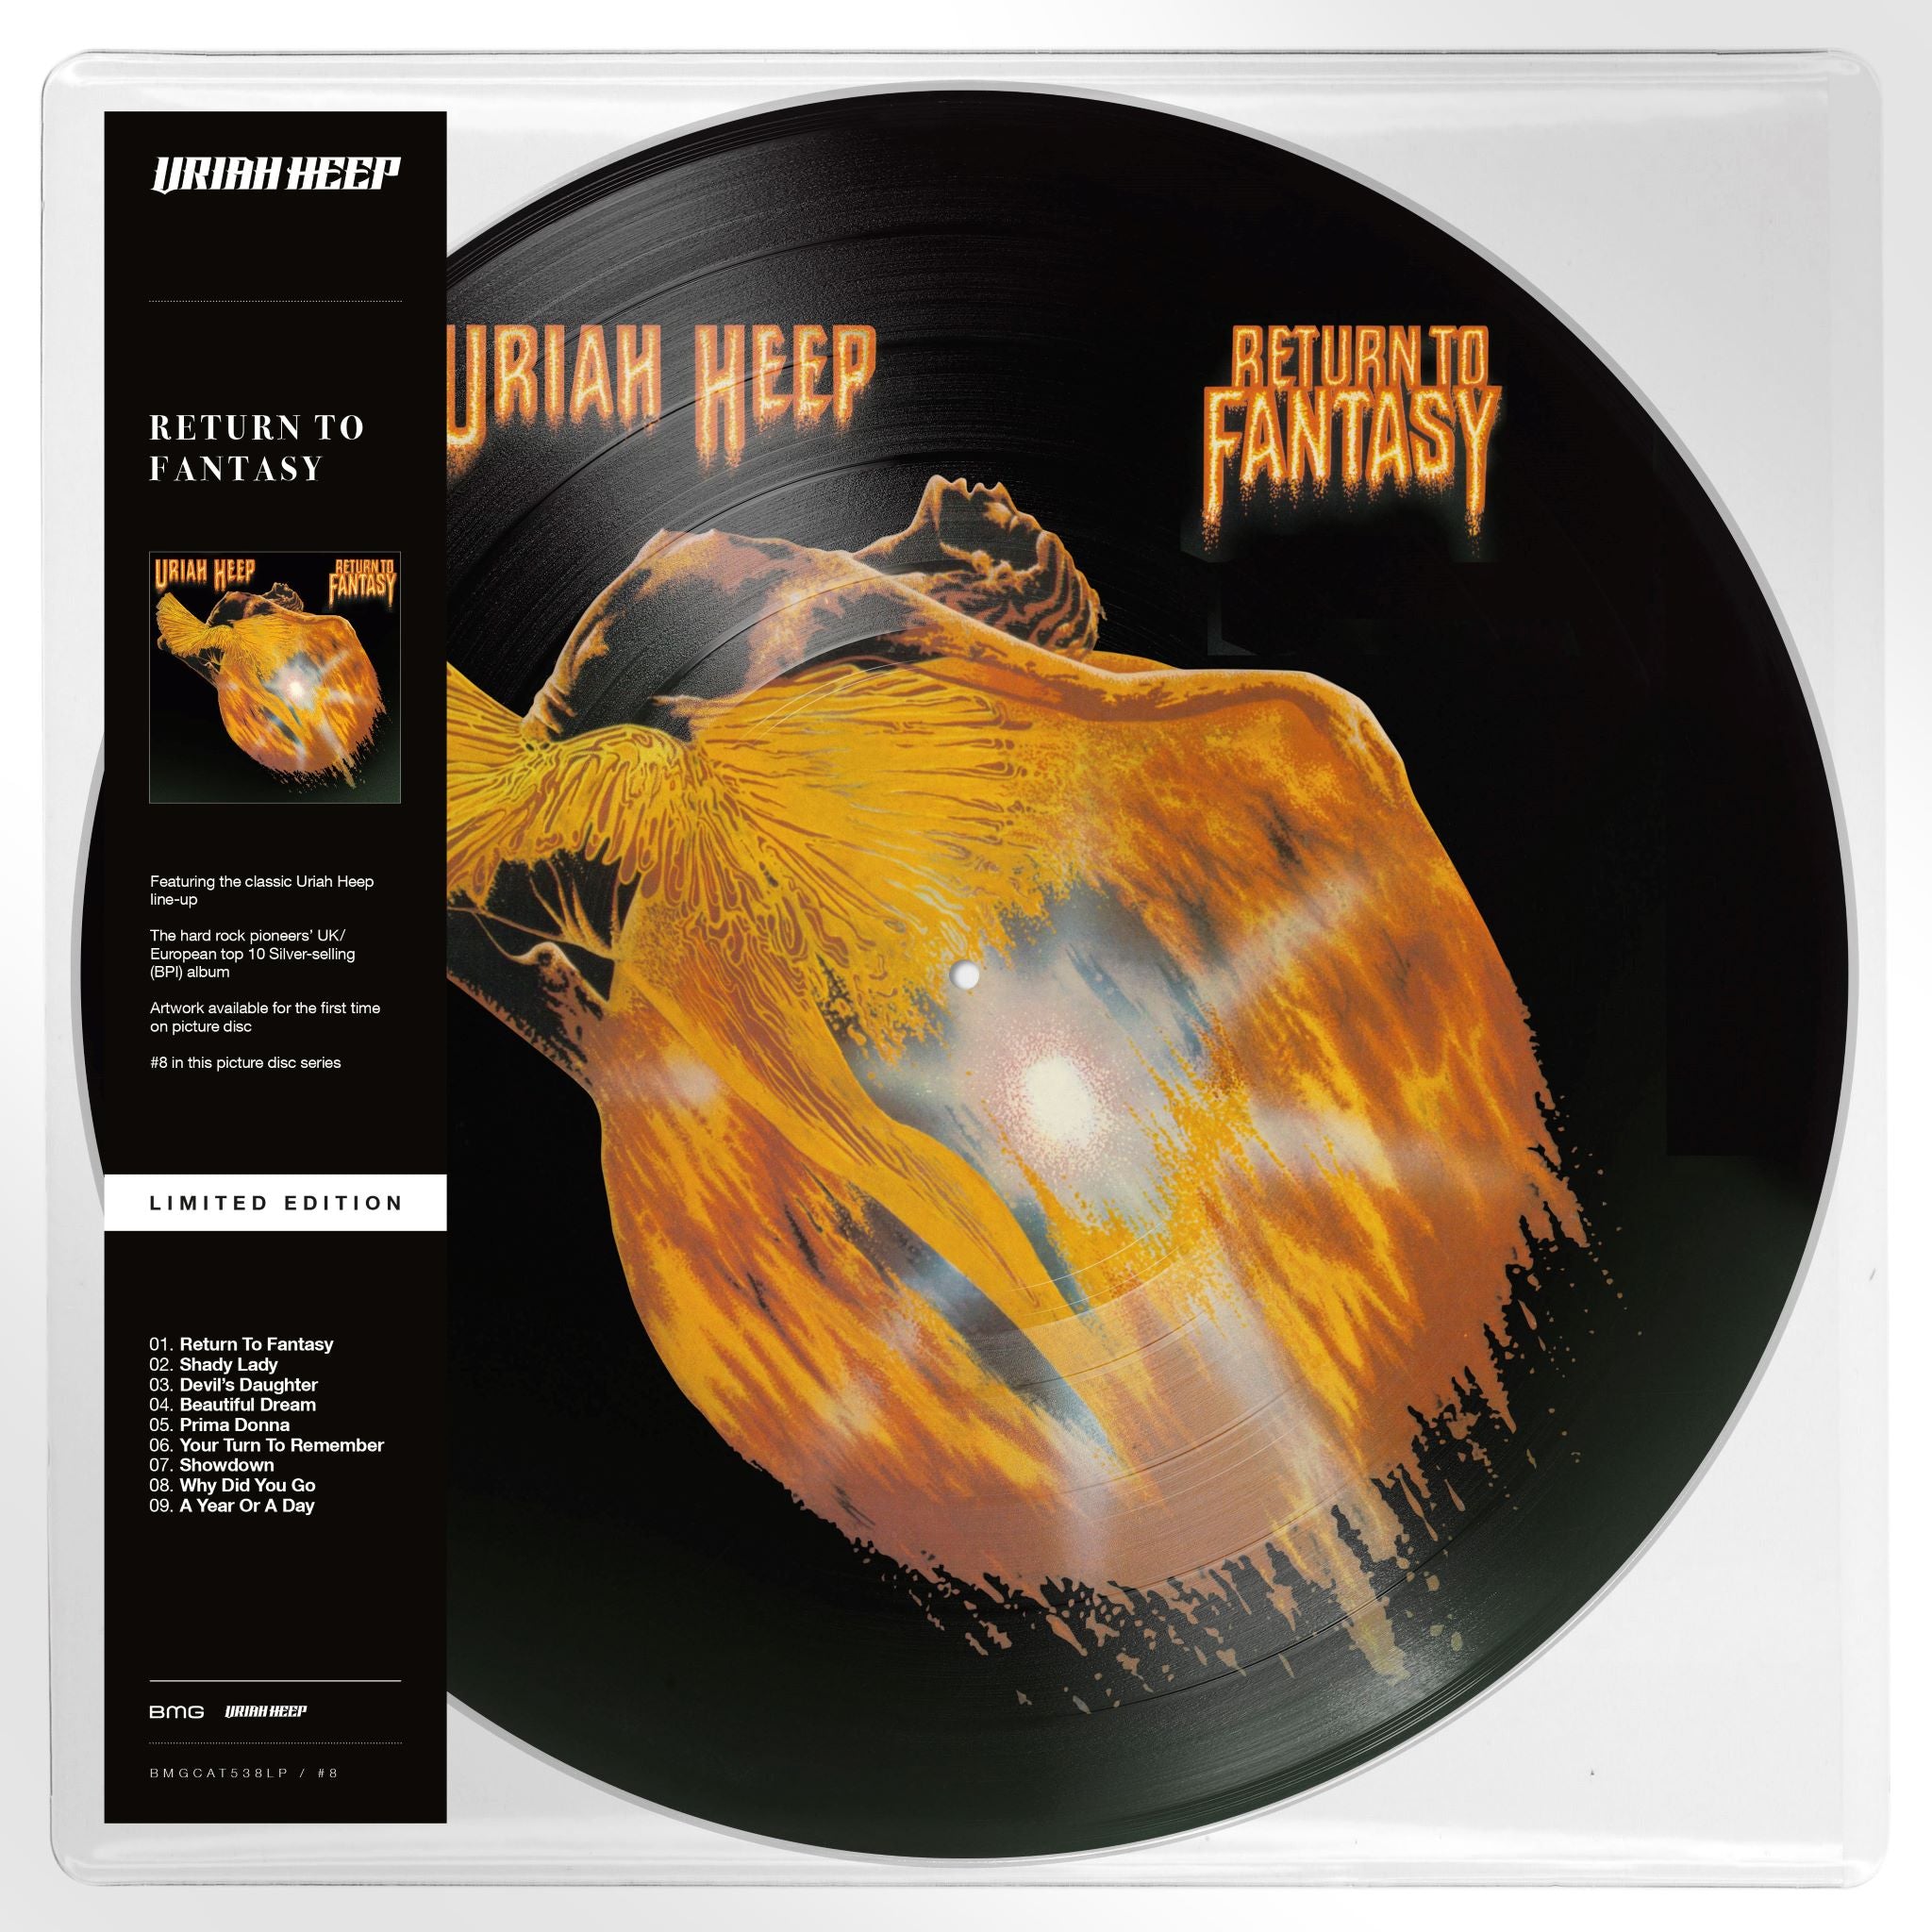 URIAH HEEP - Return to fantasy  (Limited edition picture disc)